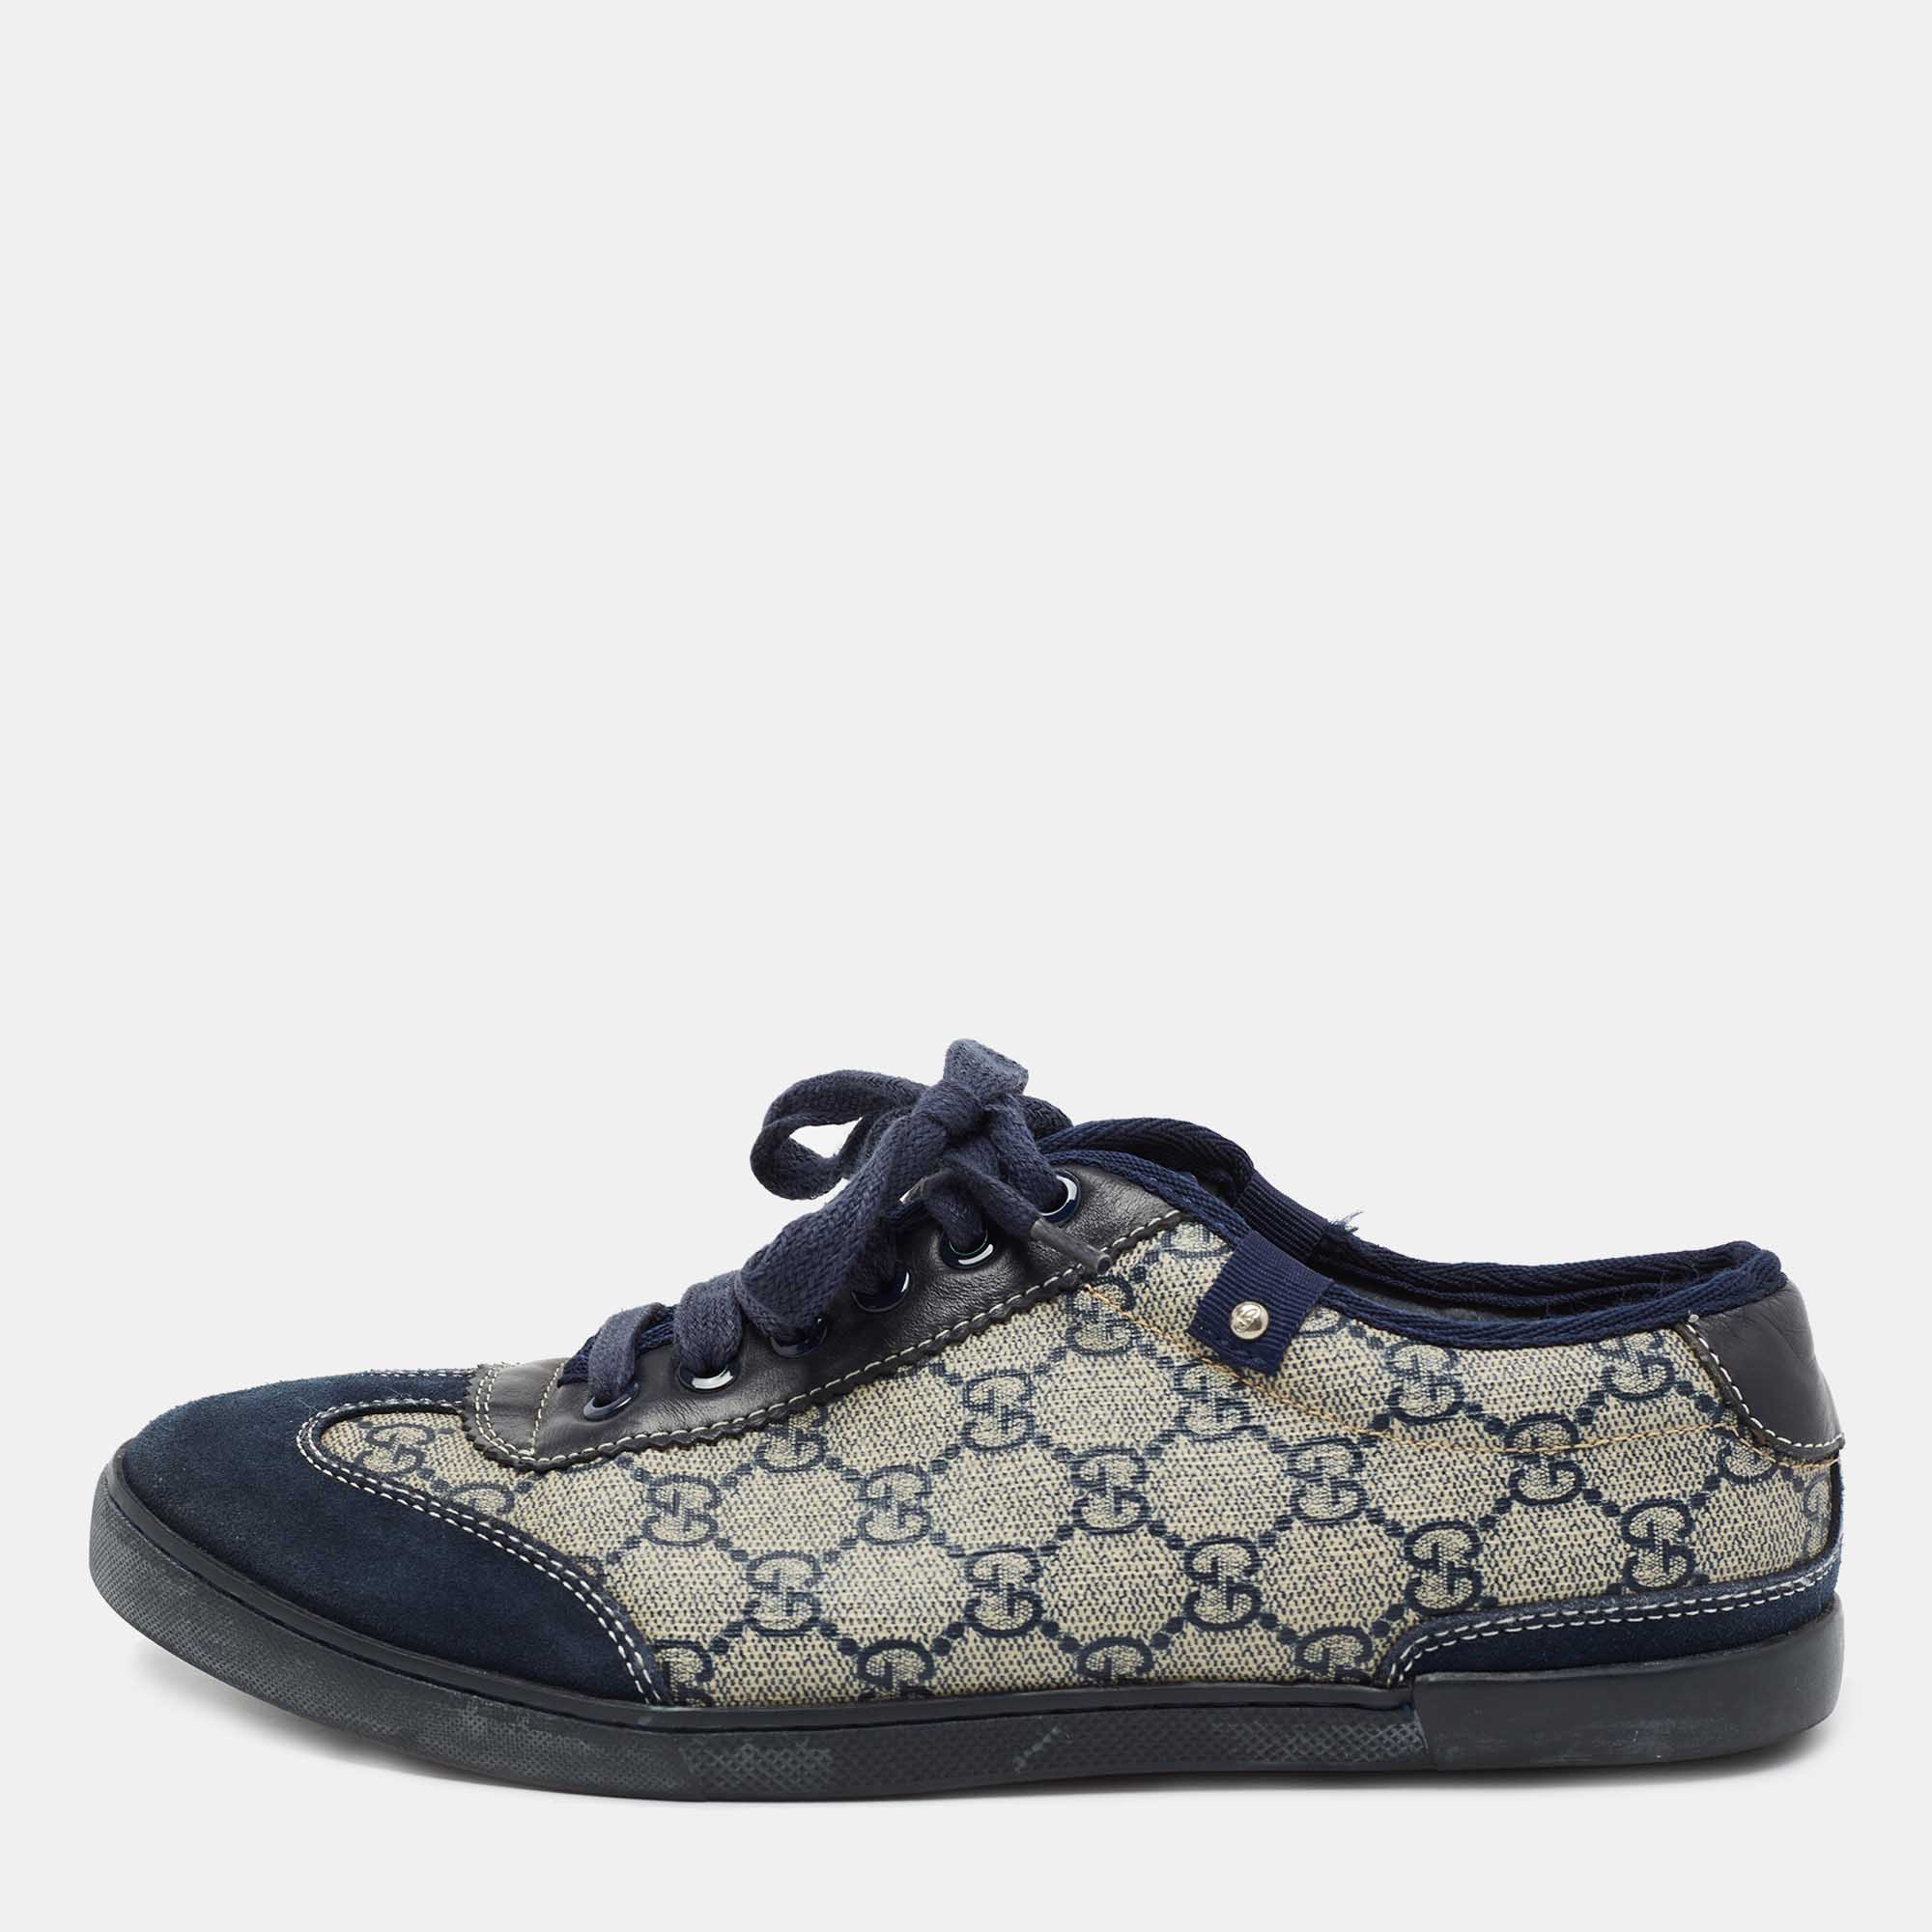 specificere Dusør roman Gucci Navy Blue/Beige GG Supreme Canvas and Suede Low Top Sneakers Size 41  Gucci | TLC